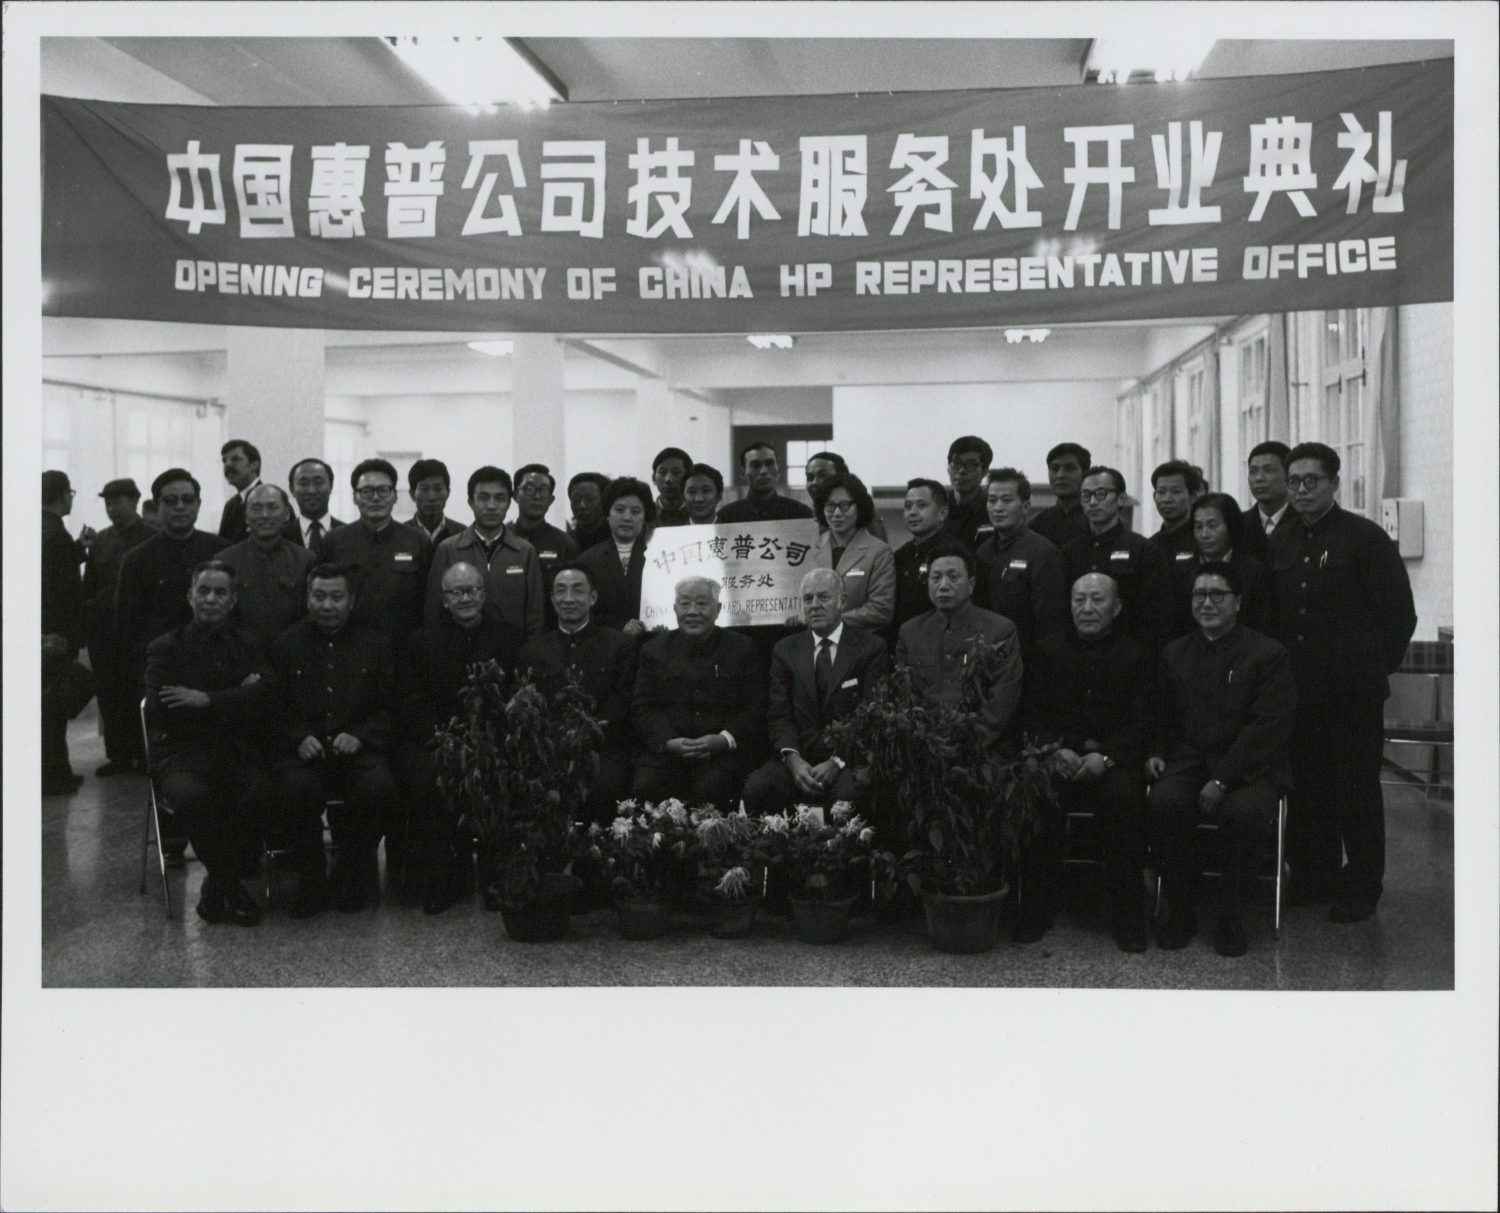 A group photo from the opening of the China Hewlett-Packard Representative Office in 1981.